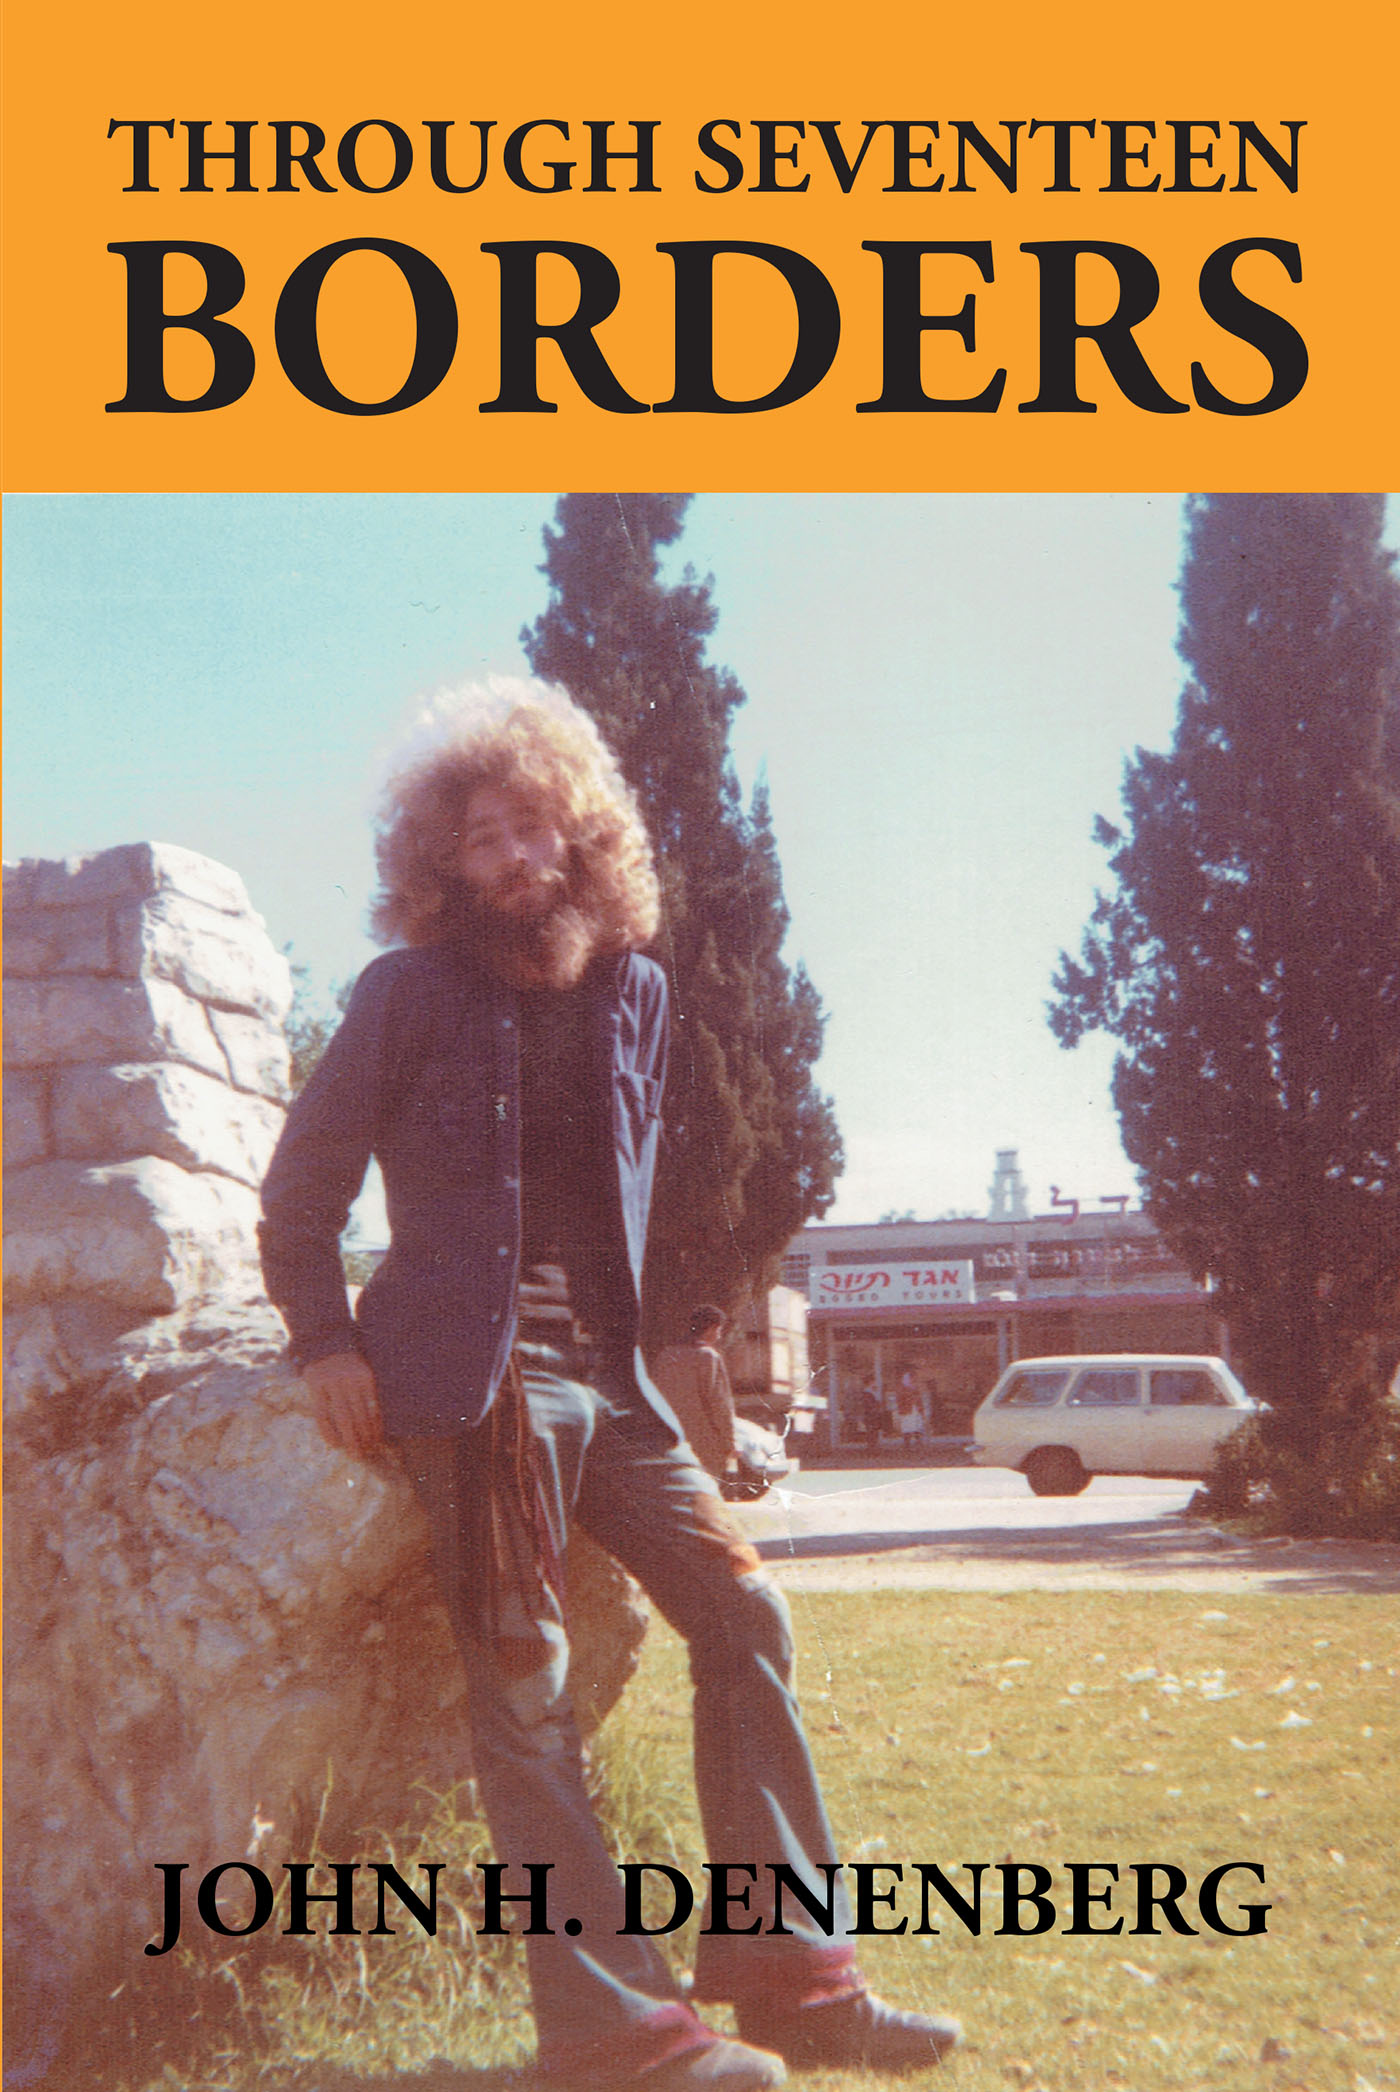 Author John H. Denenberg’s New Book, "Through Seventeen Borders," is an Enthralling Thrill Ride of Two Friends Who Set Off on Vacation & Get More Than They Bargained for